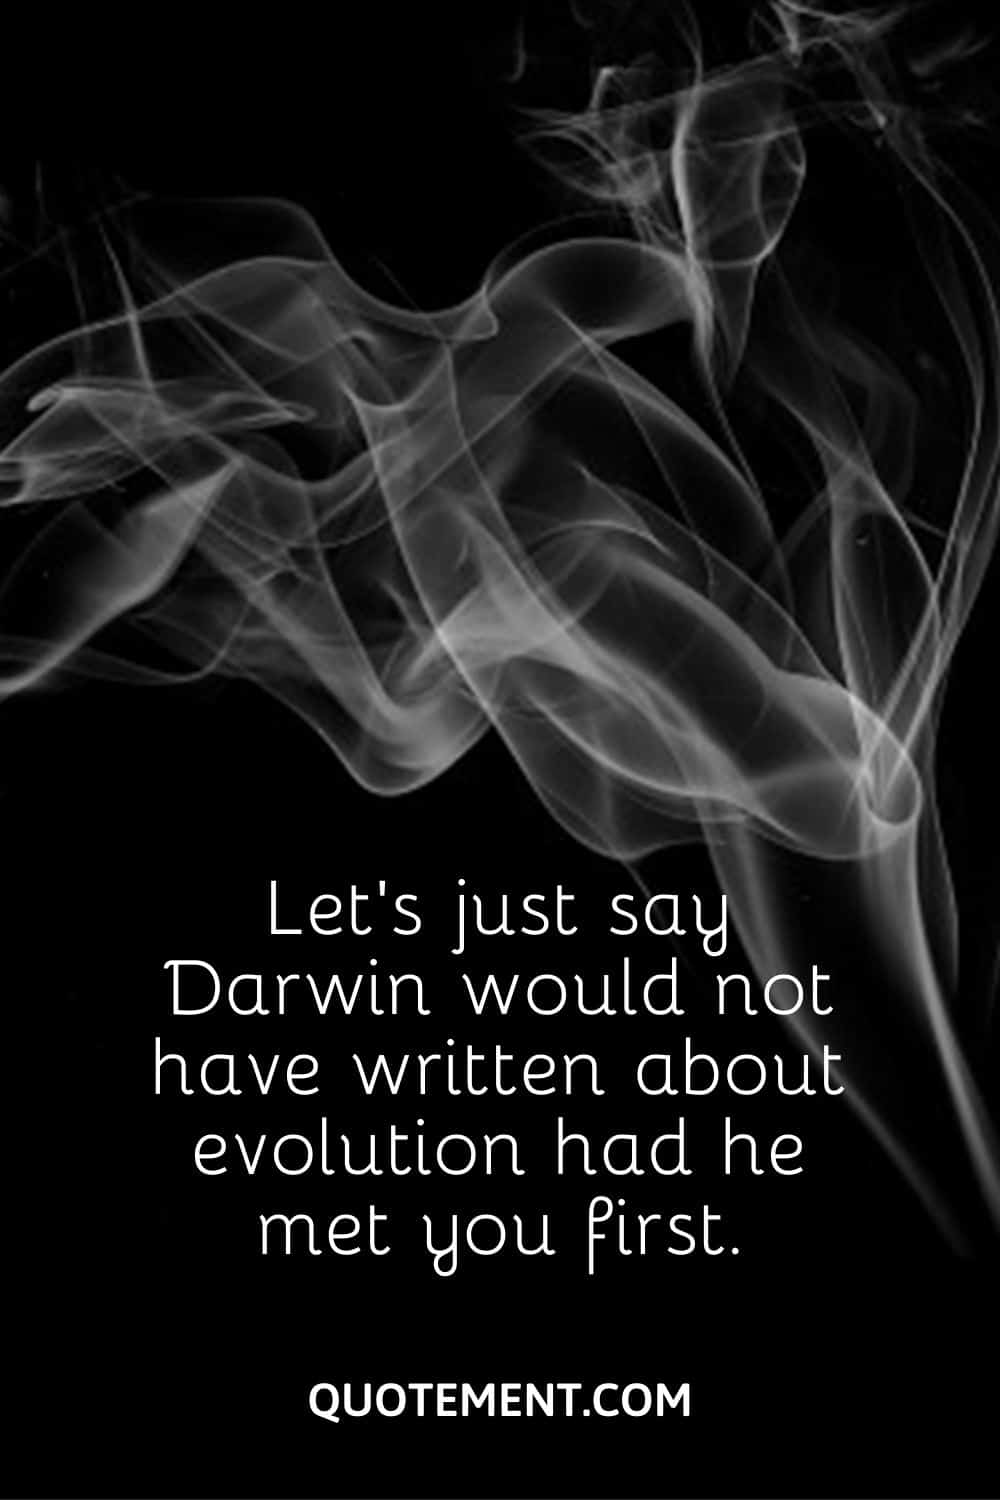 Let’s just say Darwin would not have written about evolution had he met you first.